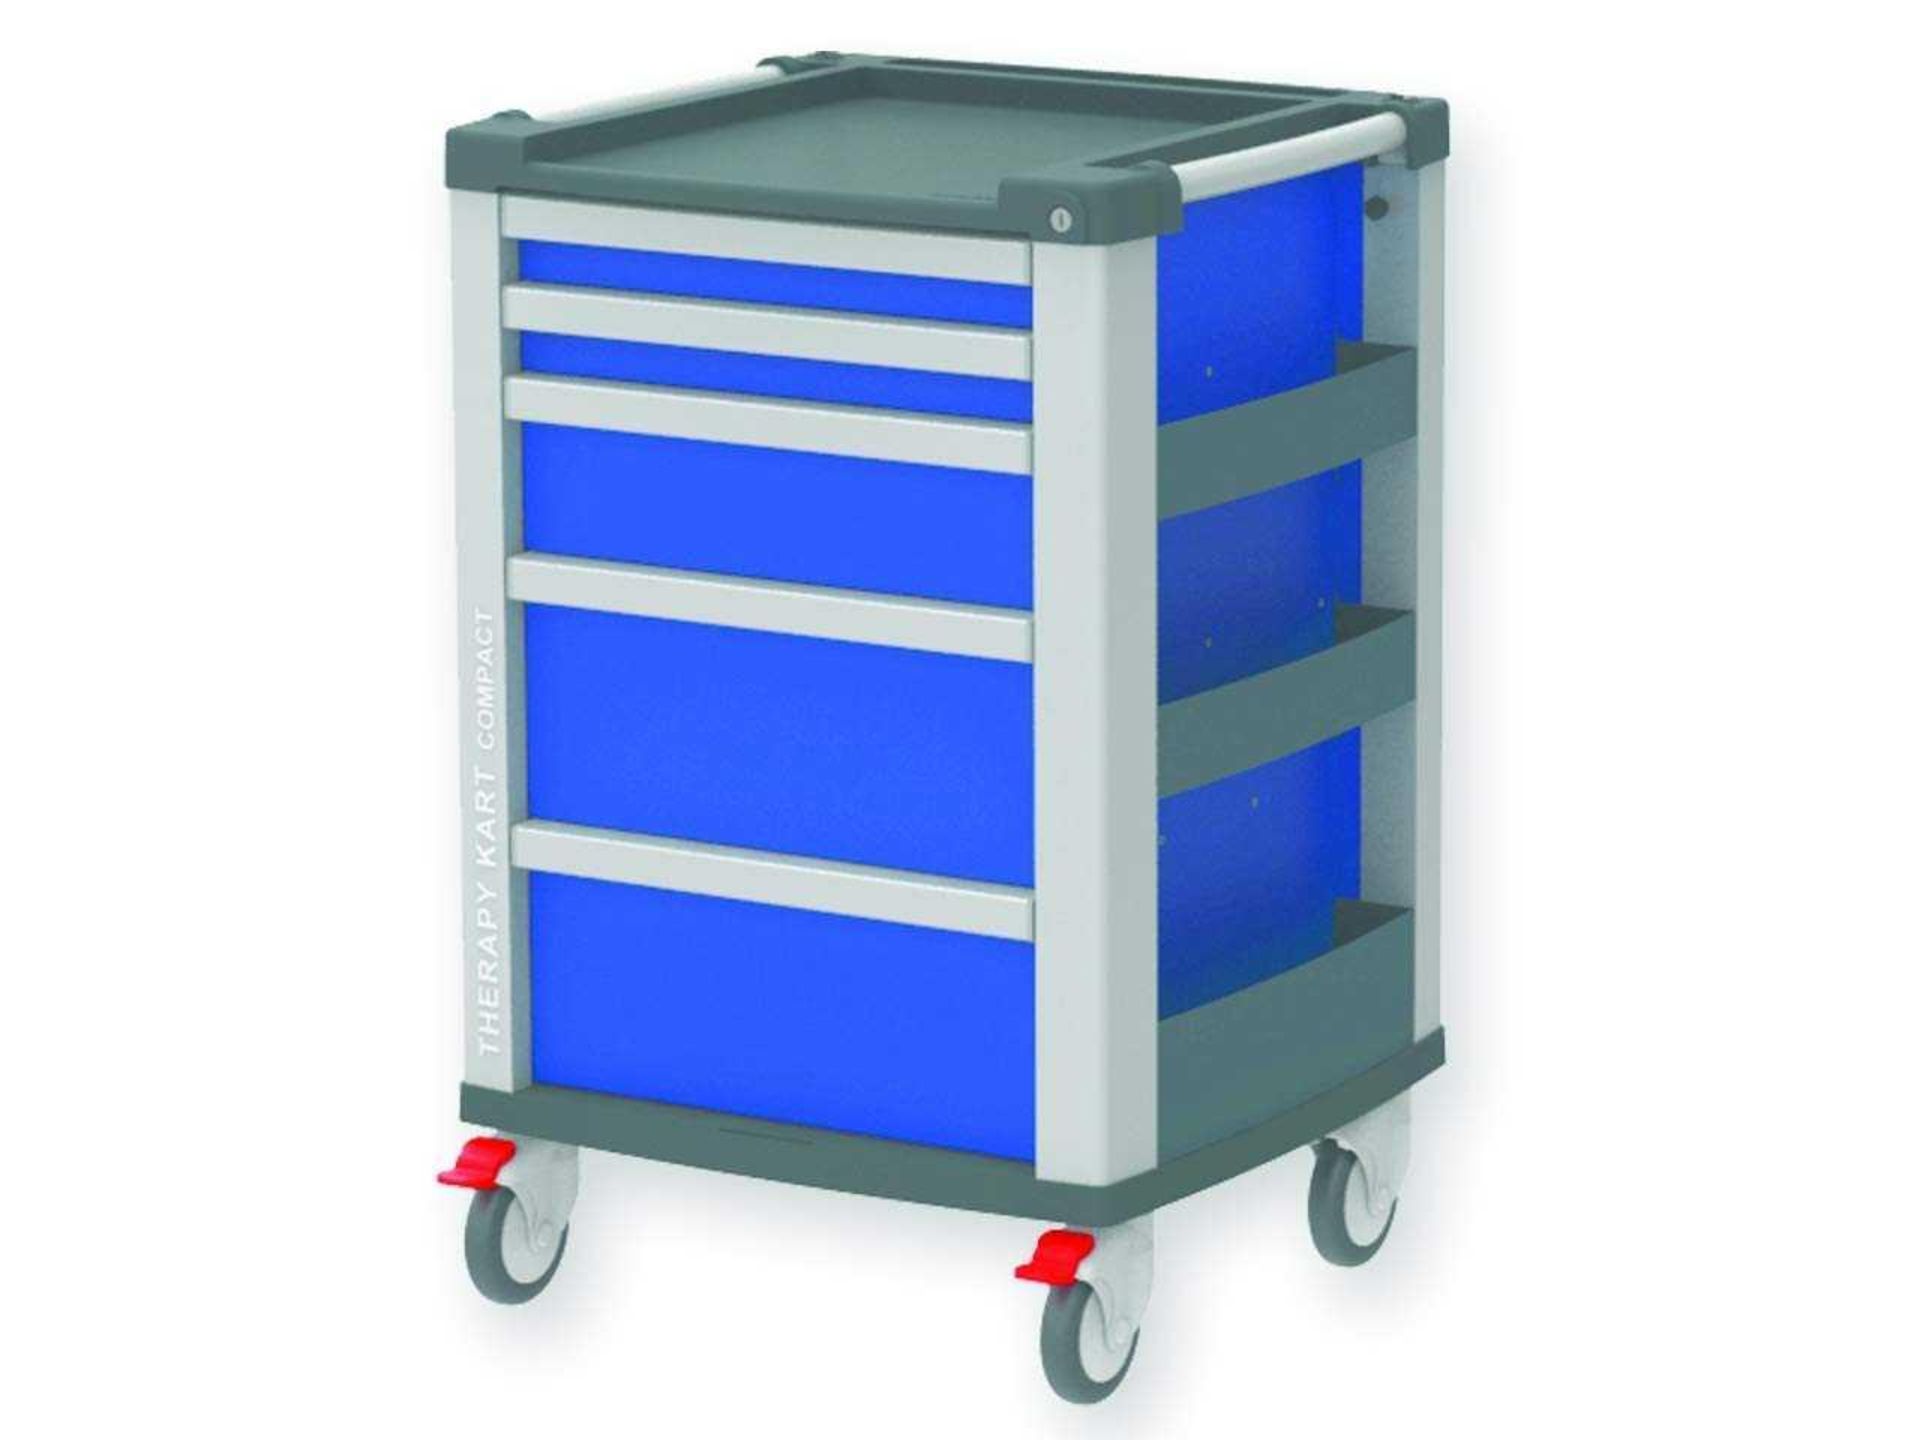 RRP £1900 Boxed Gima 45663 Medical Cart Emergency Kart Compact - Blue - 5 Drawers With Exclusive Aut